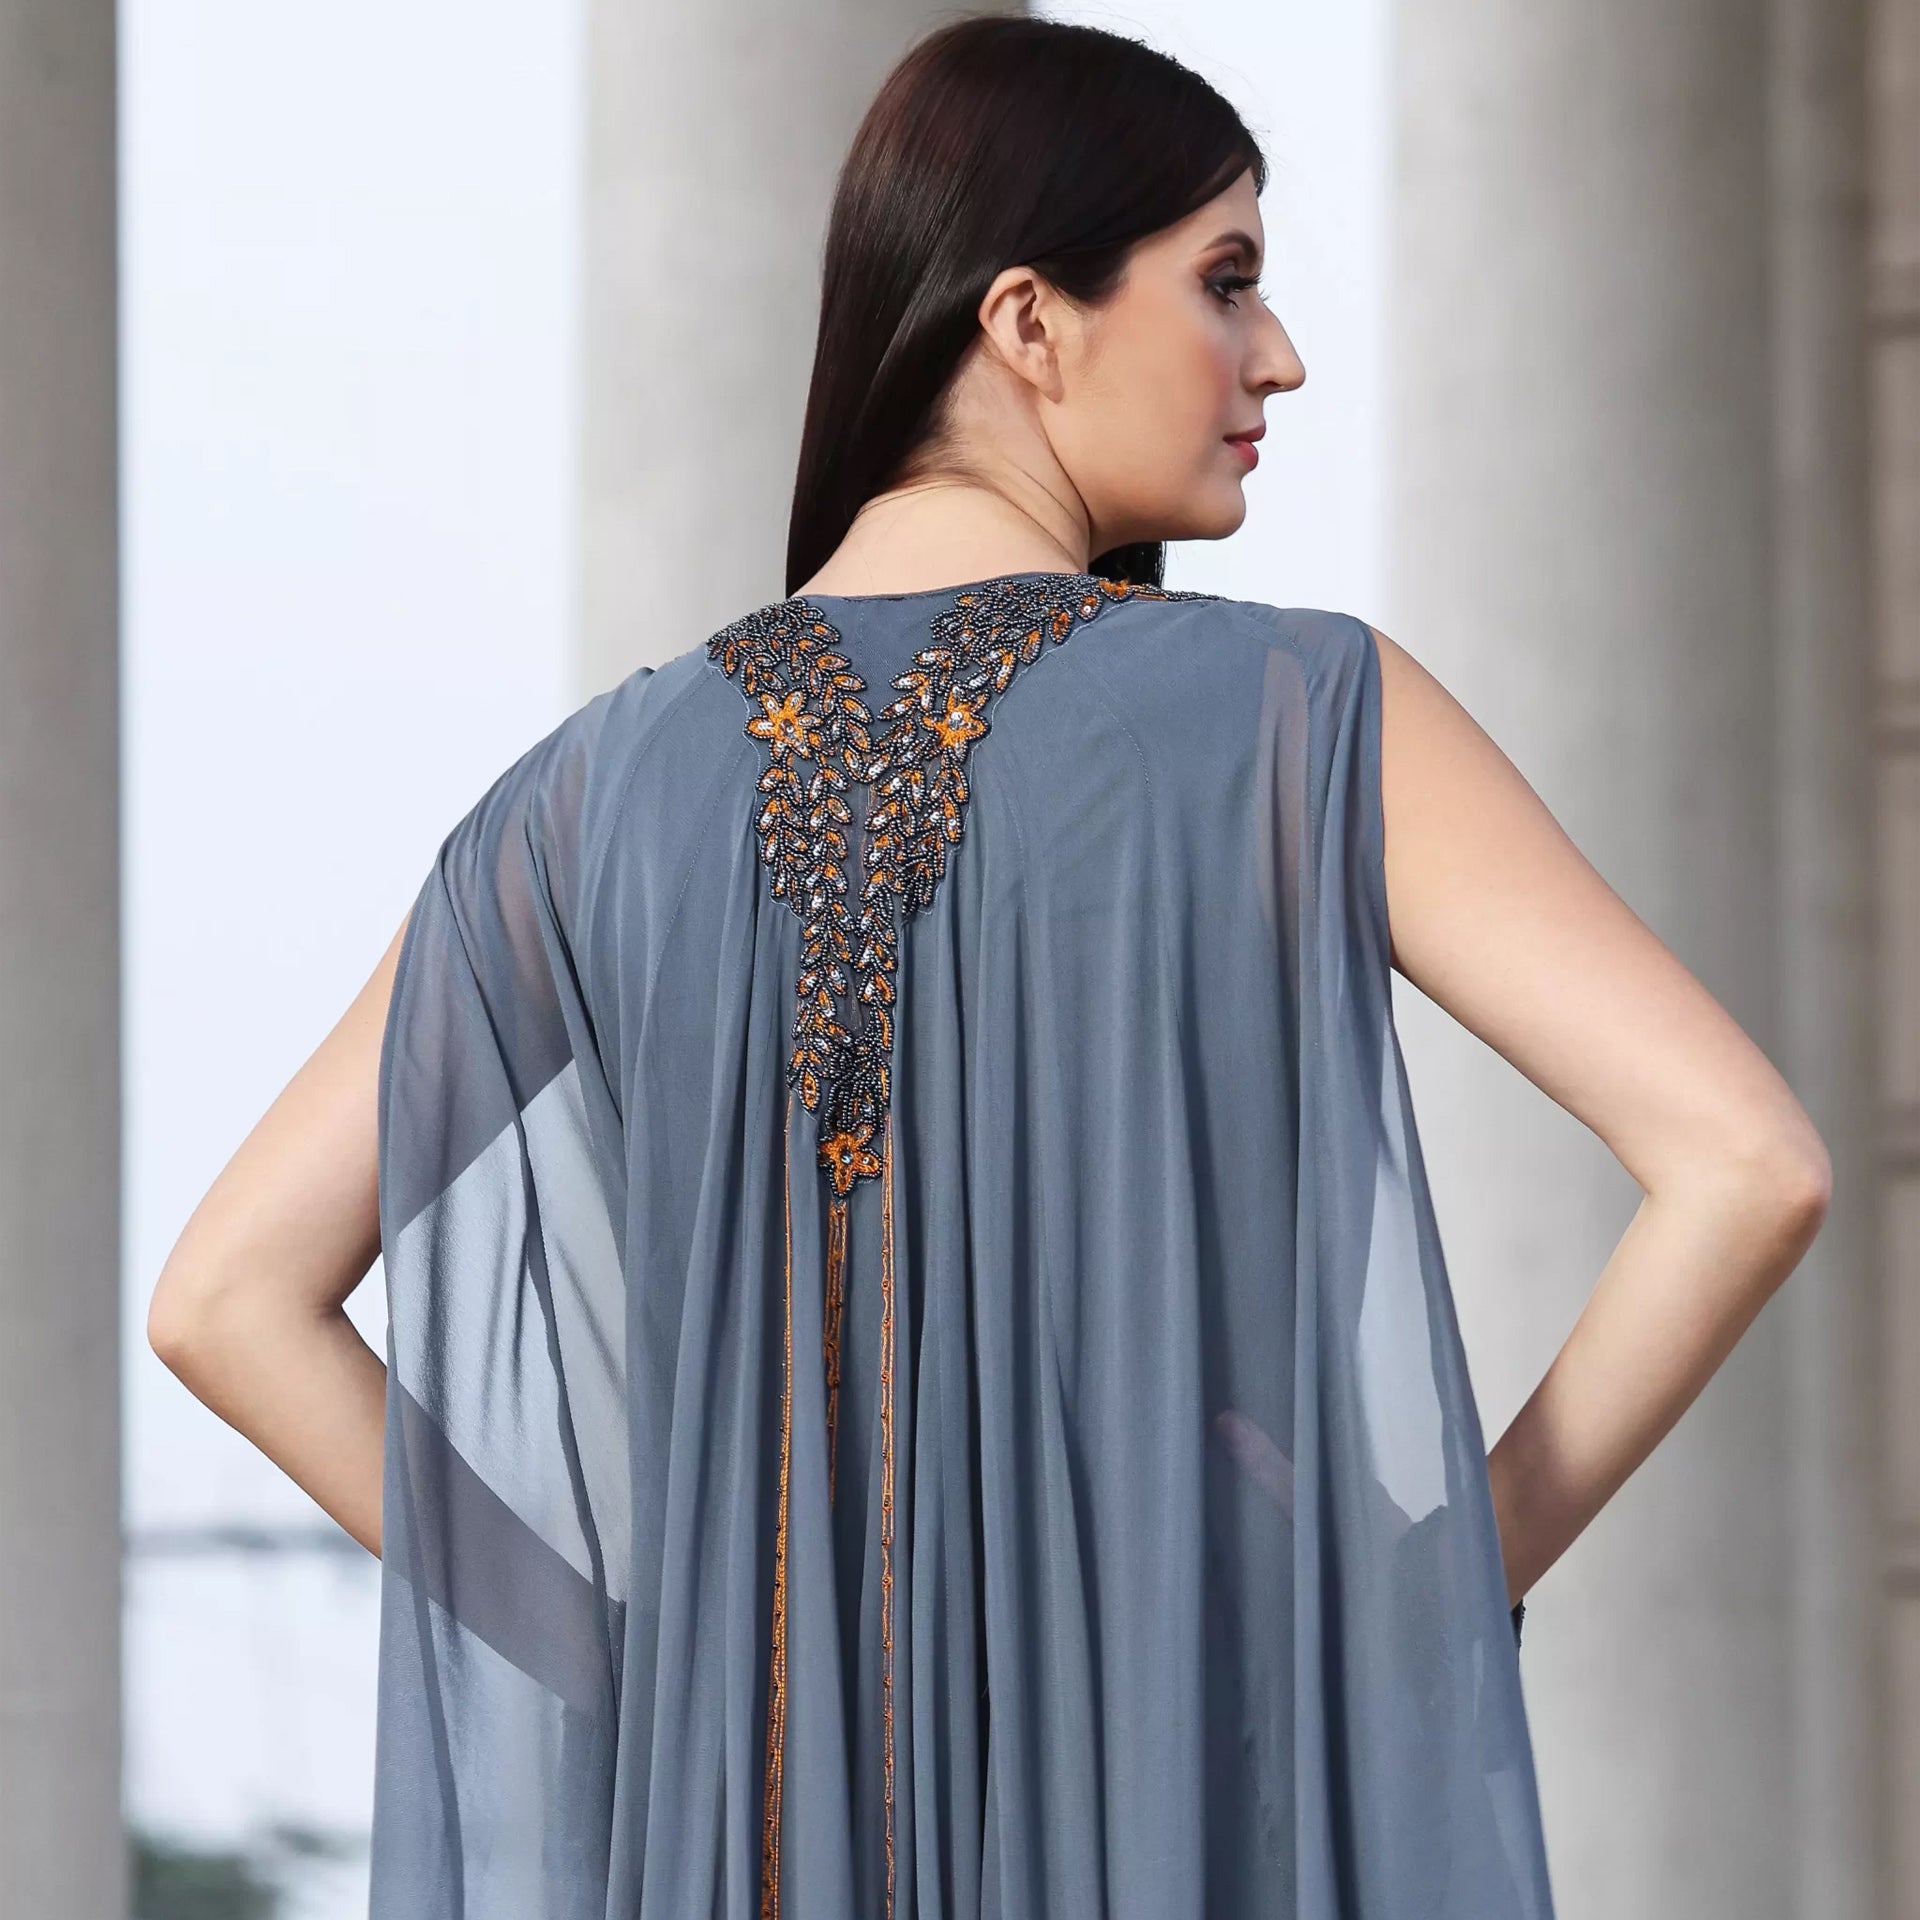 Gray Sleeveless Dress With Gold Embroidery From Shalky